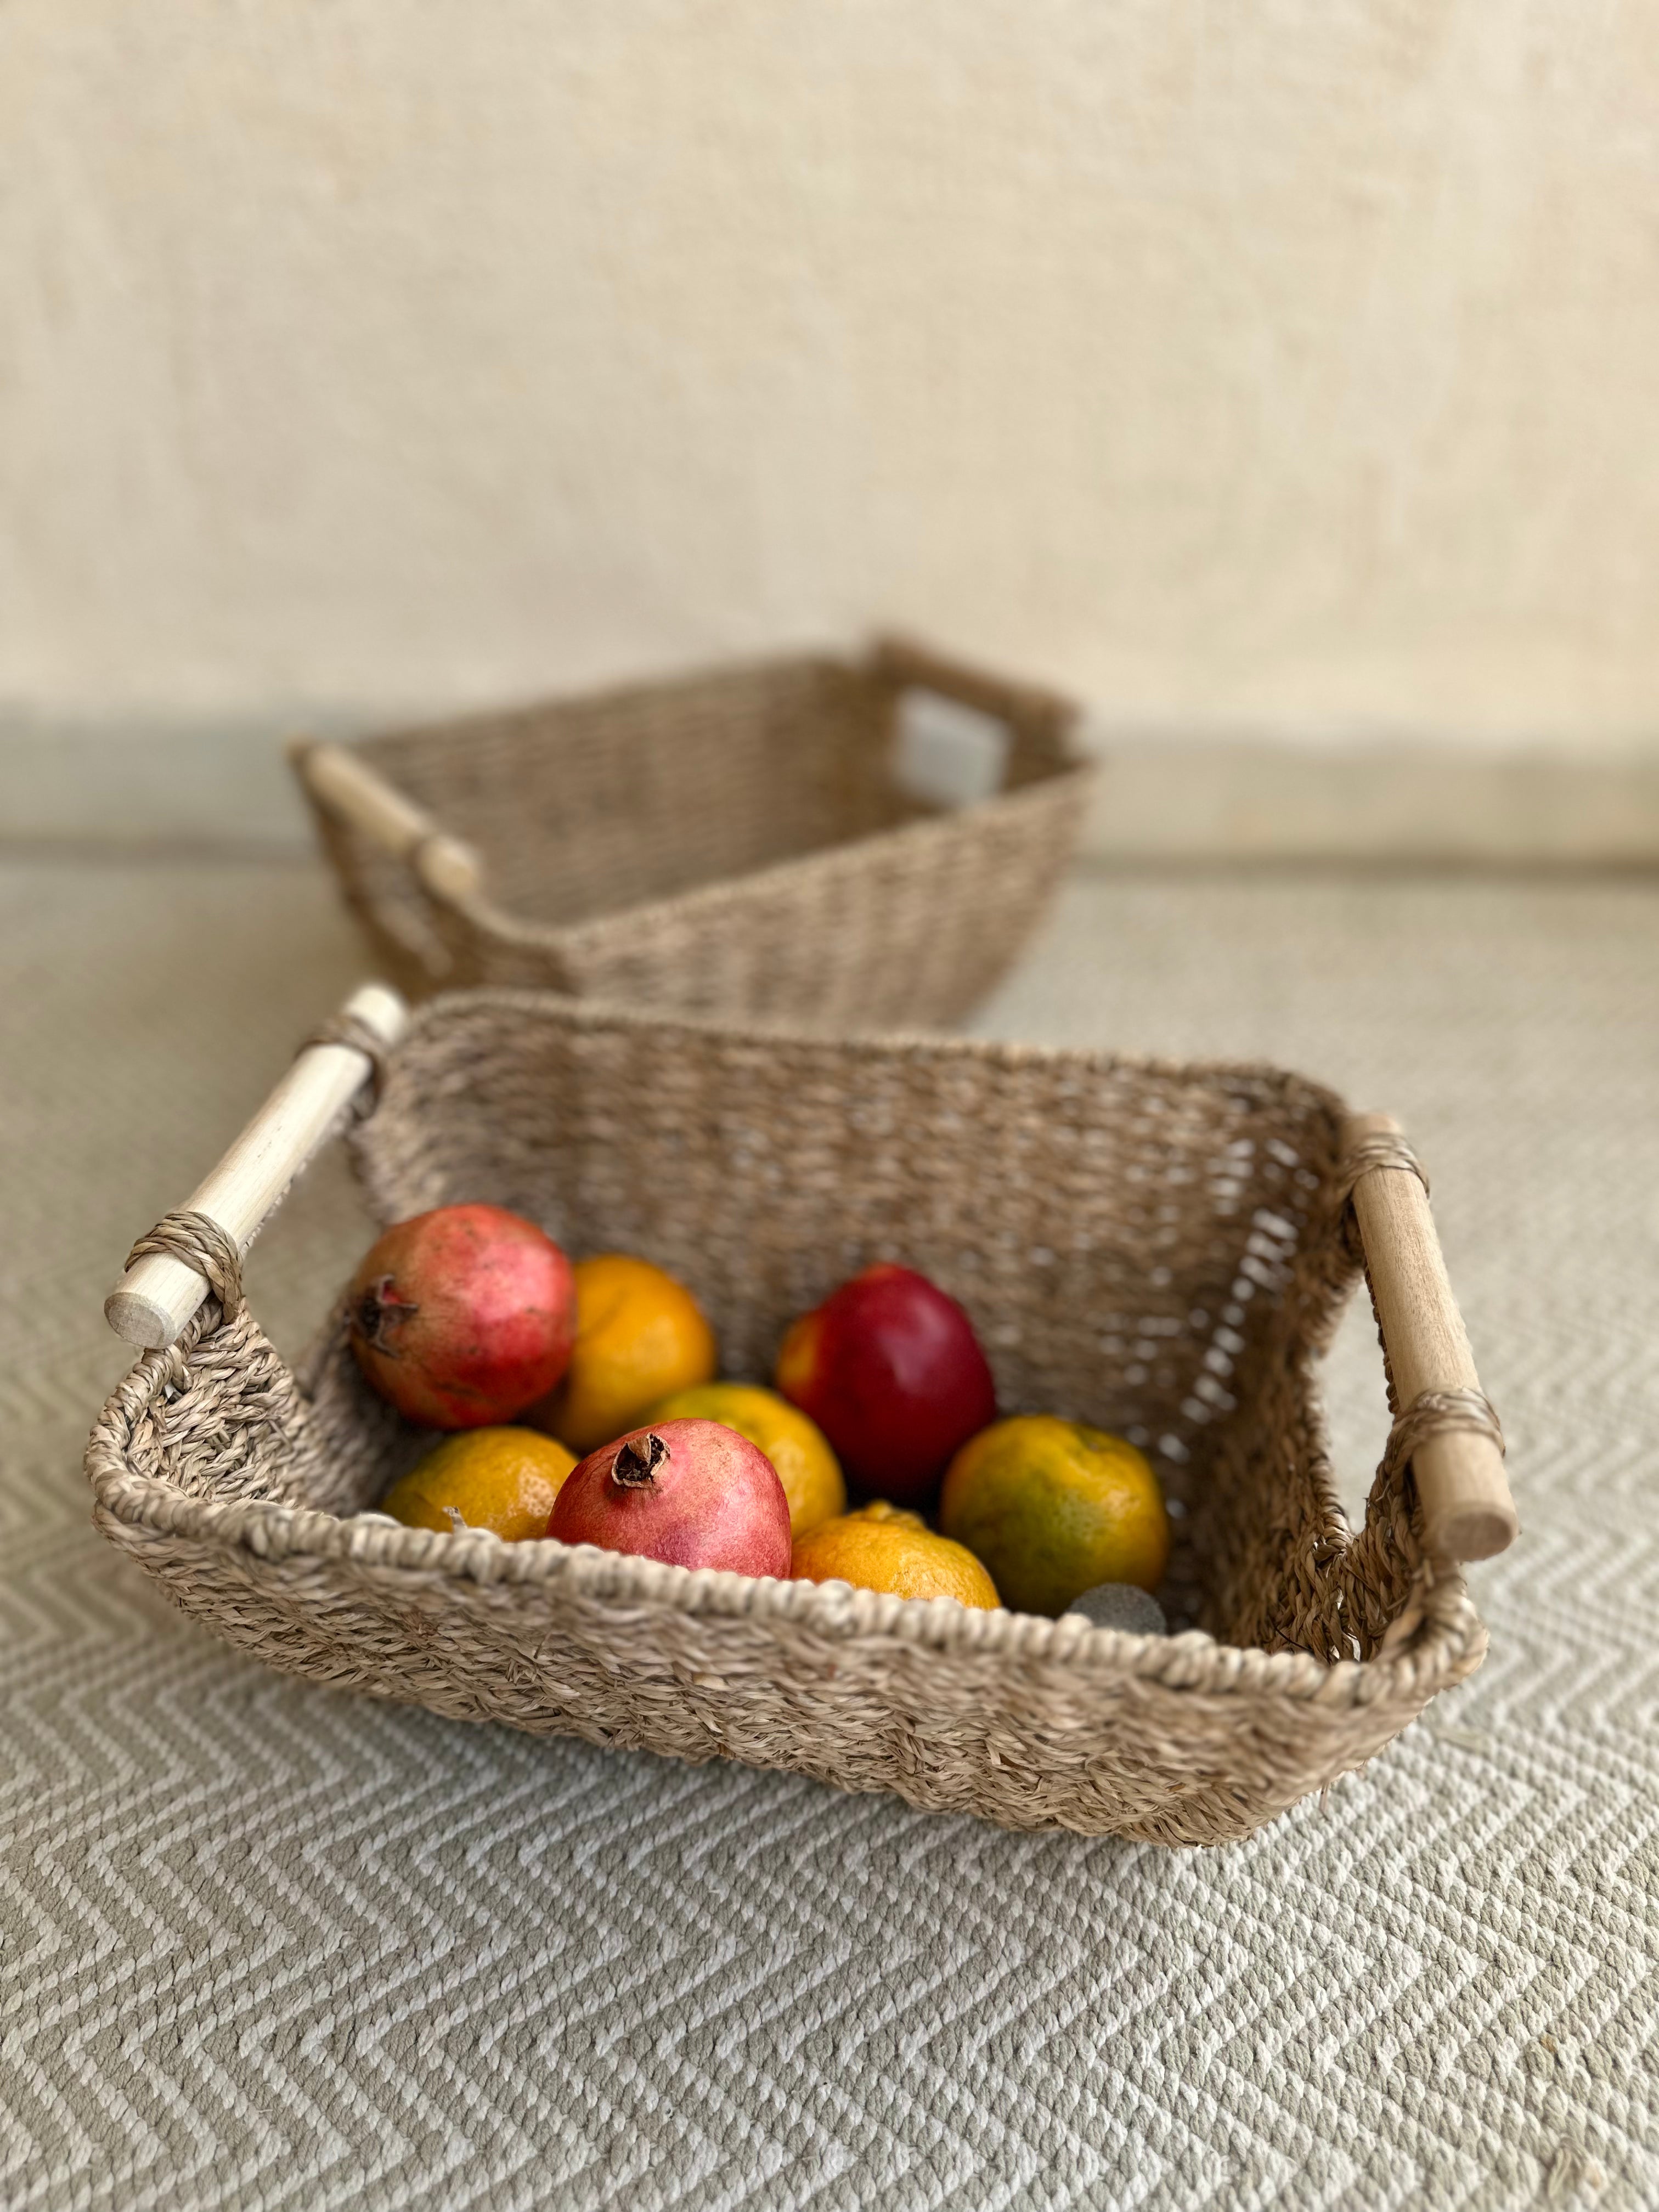 Seagrass Tray Basket with Wooden Handle